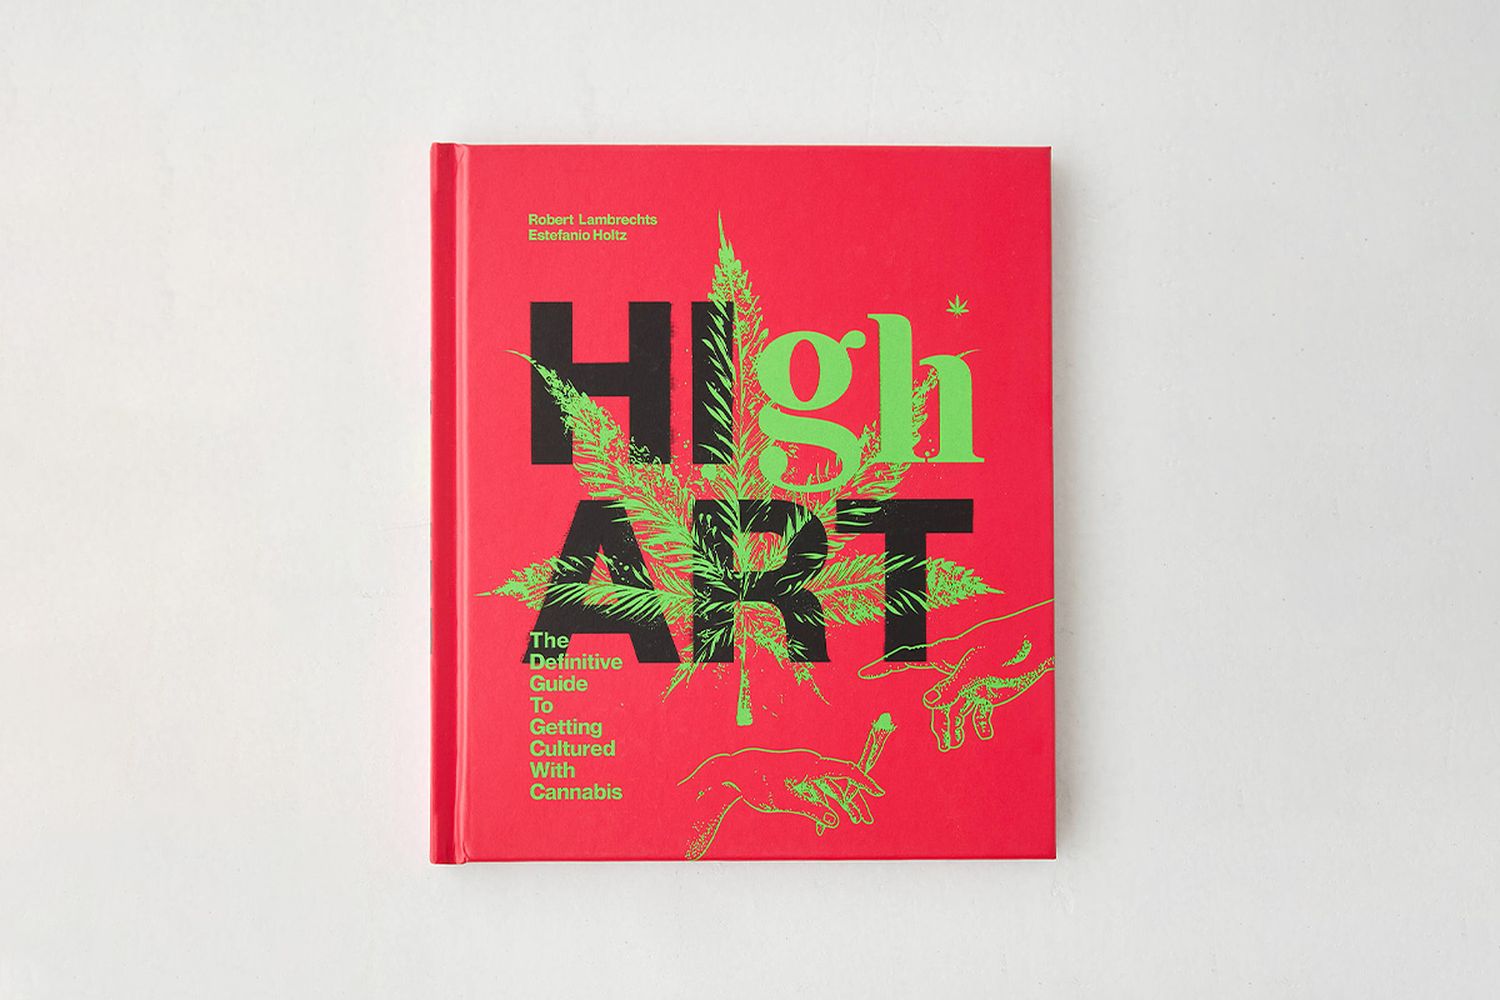 High Art: The Definitive Guide To Getting Cultured With Cannabis